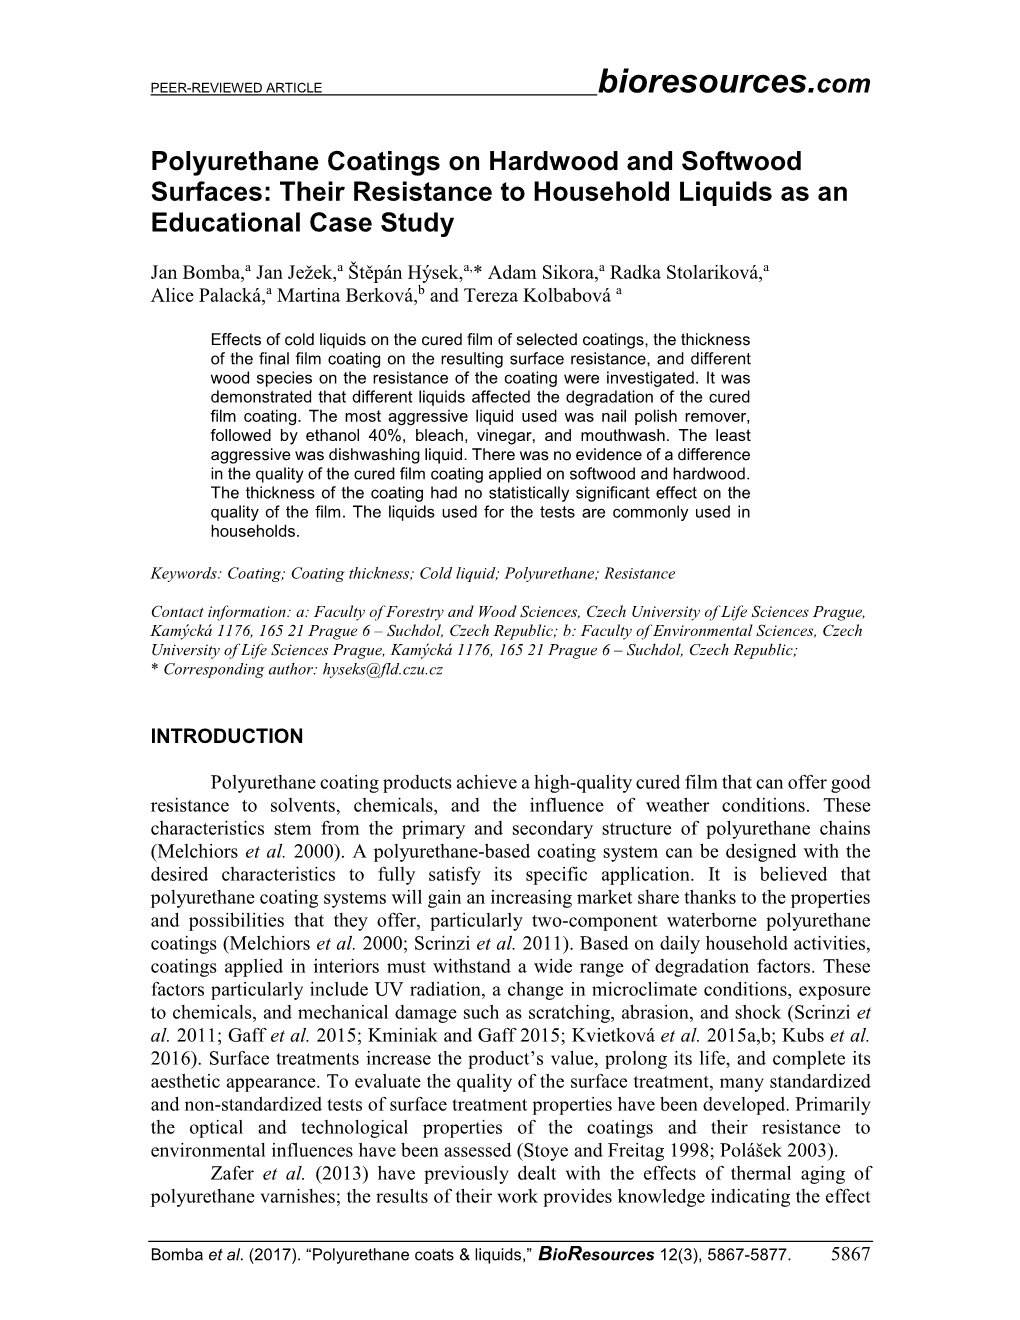 Polyurethane Coatings on Hardwood and Softwood Surfaces: Their Resistance to Household Liquids As an Educational Case Study